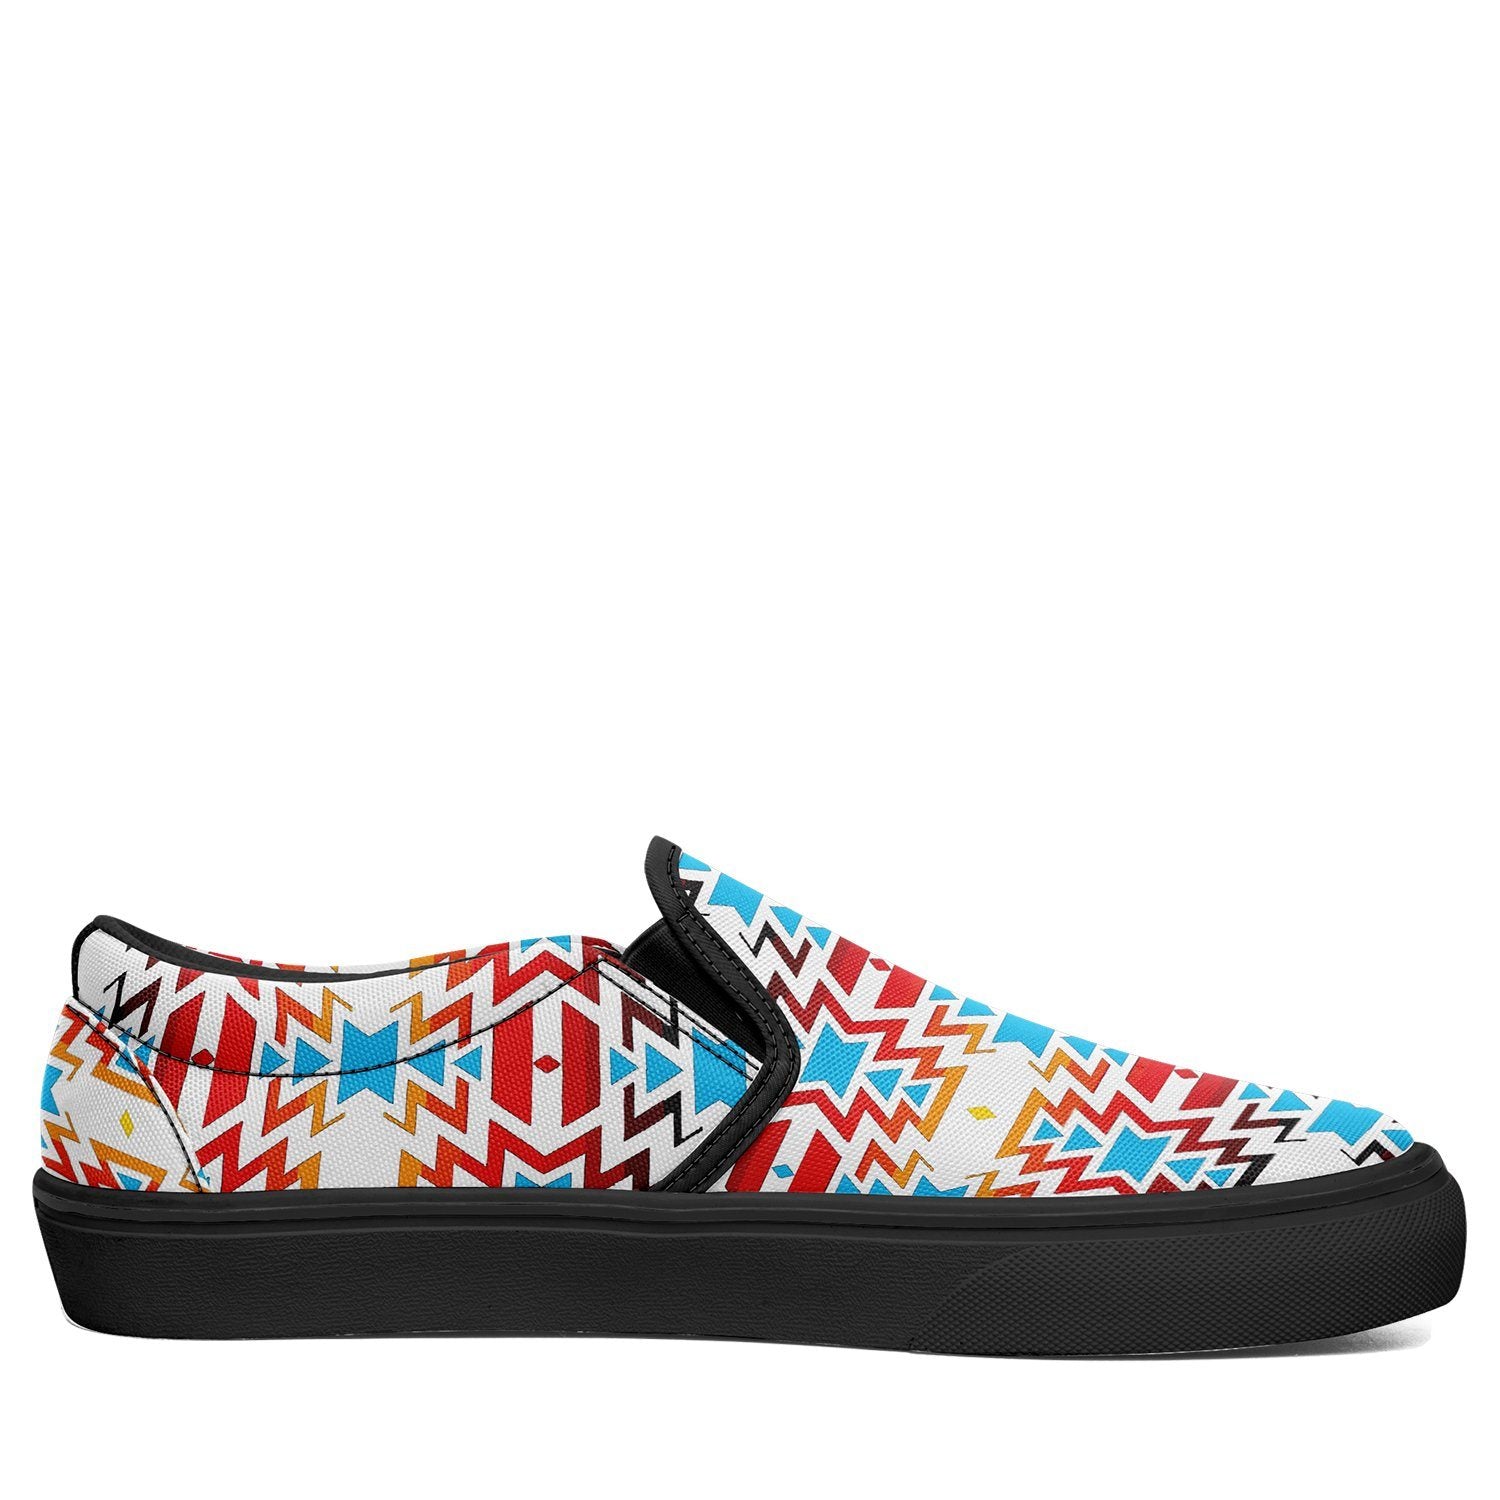 Fire Colors and Sky Otoyimm Canvas Slip On Shoes 49 Dzine 